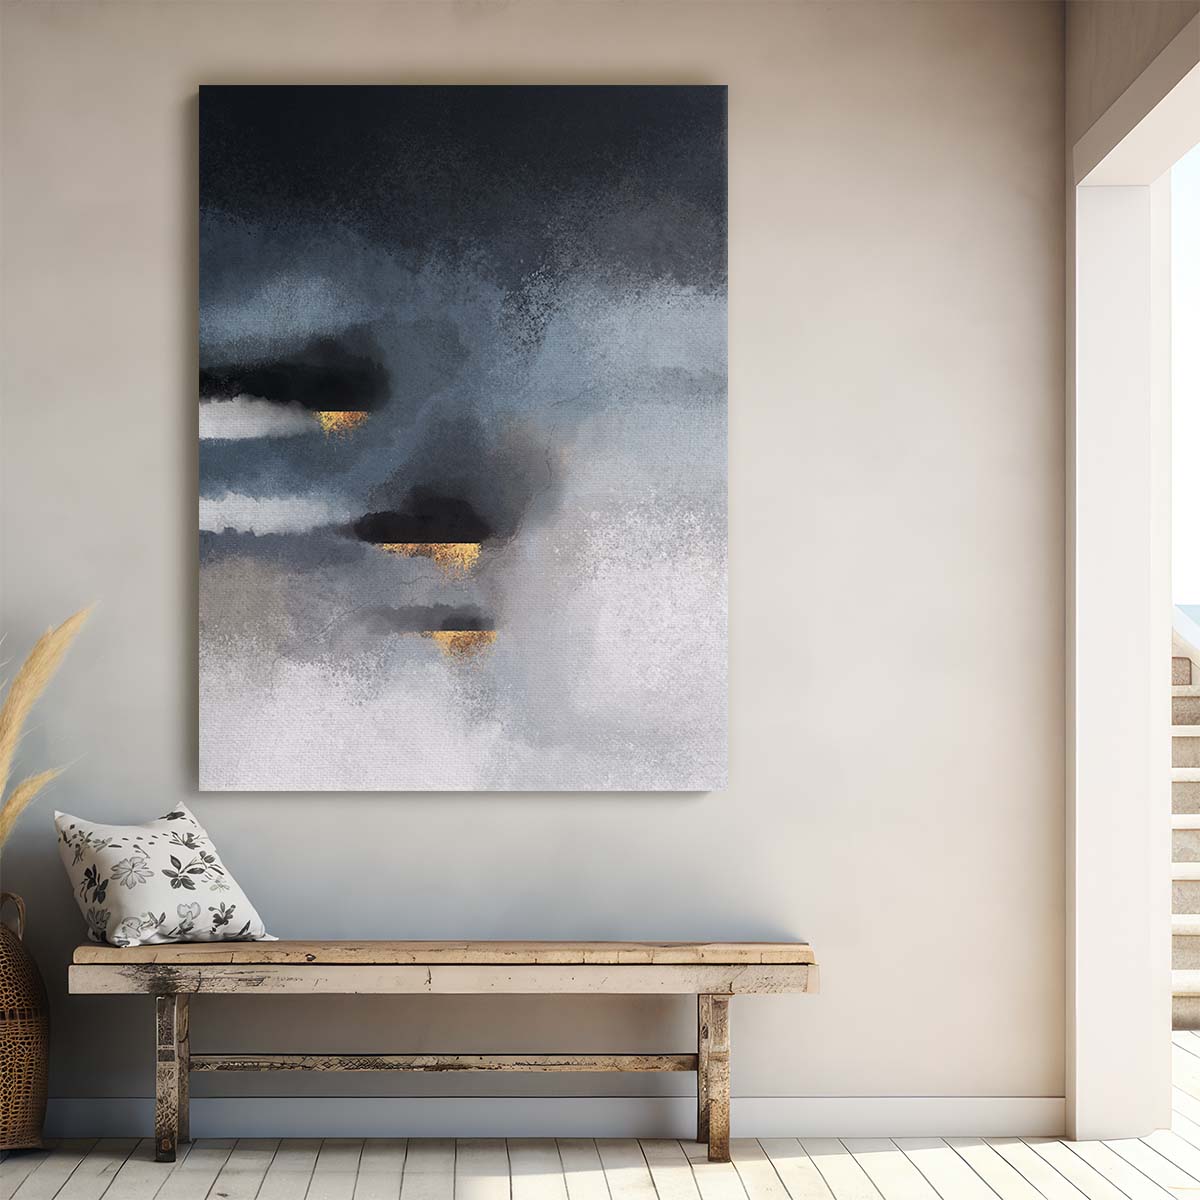 Abstract Golden Cloudy Sky Illustration in Black, White, and Gold by Luxuriance Designs, made in USA